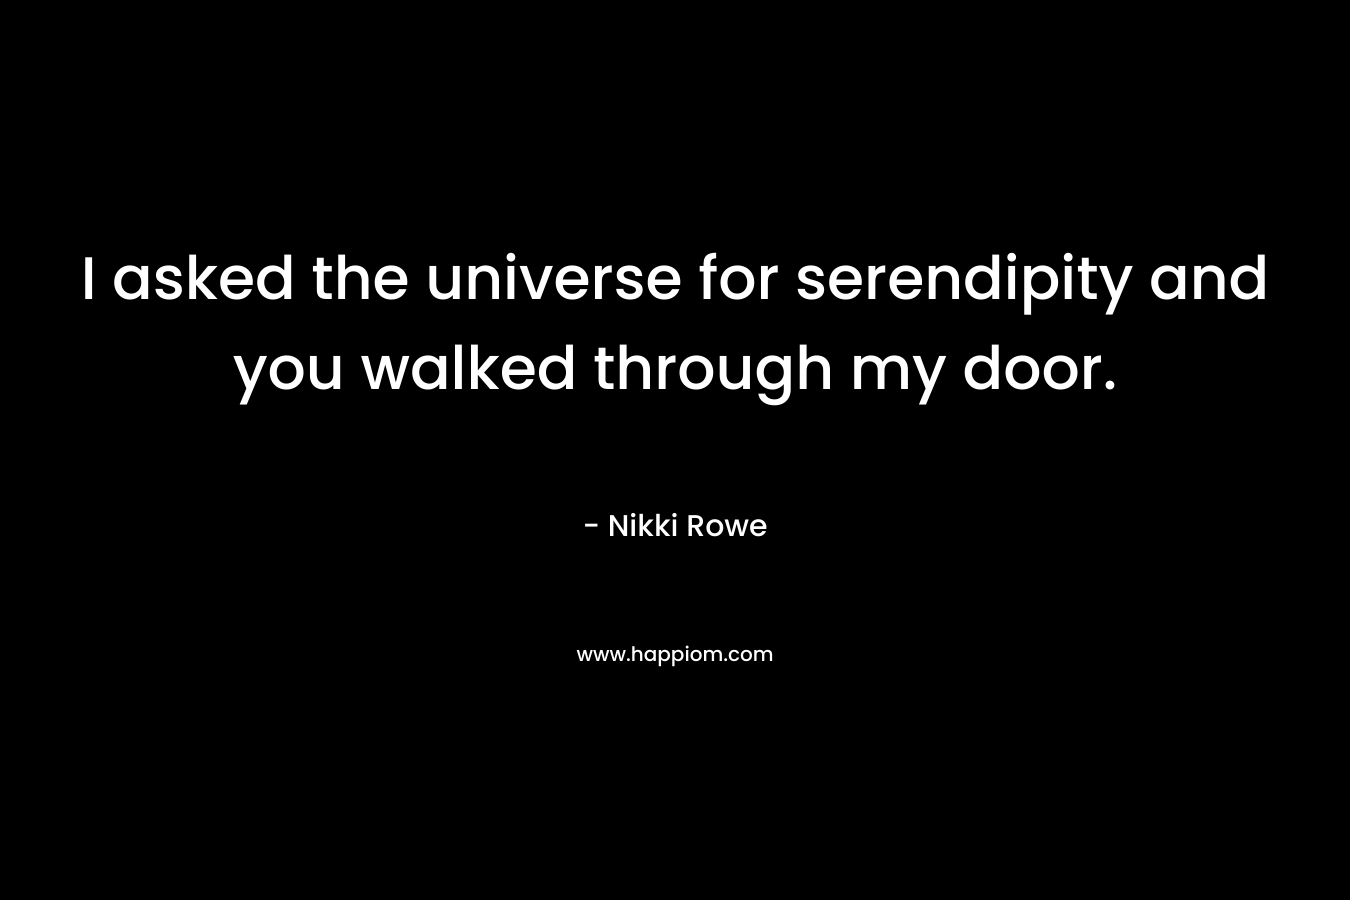 I asked the universe for serendipity and you walked through my door. – Nikki Rowe